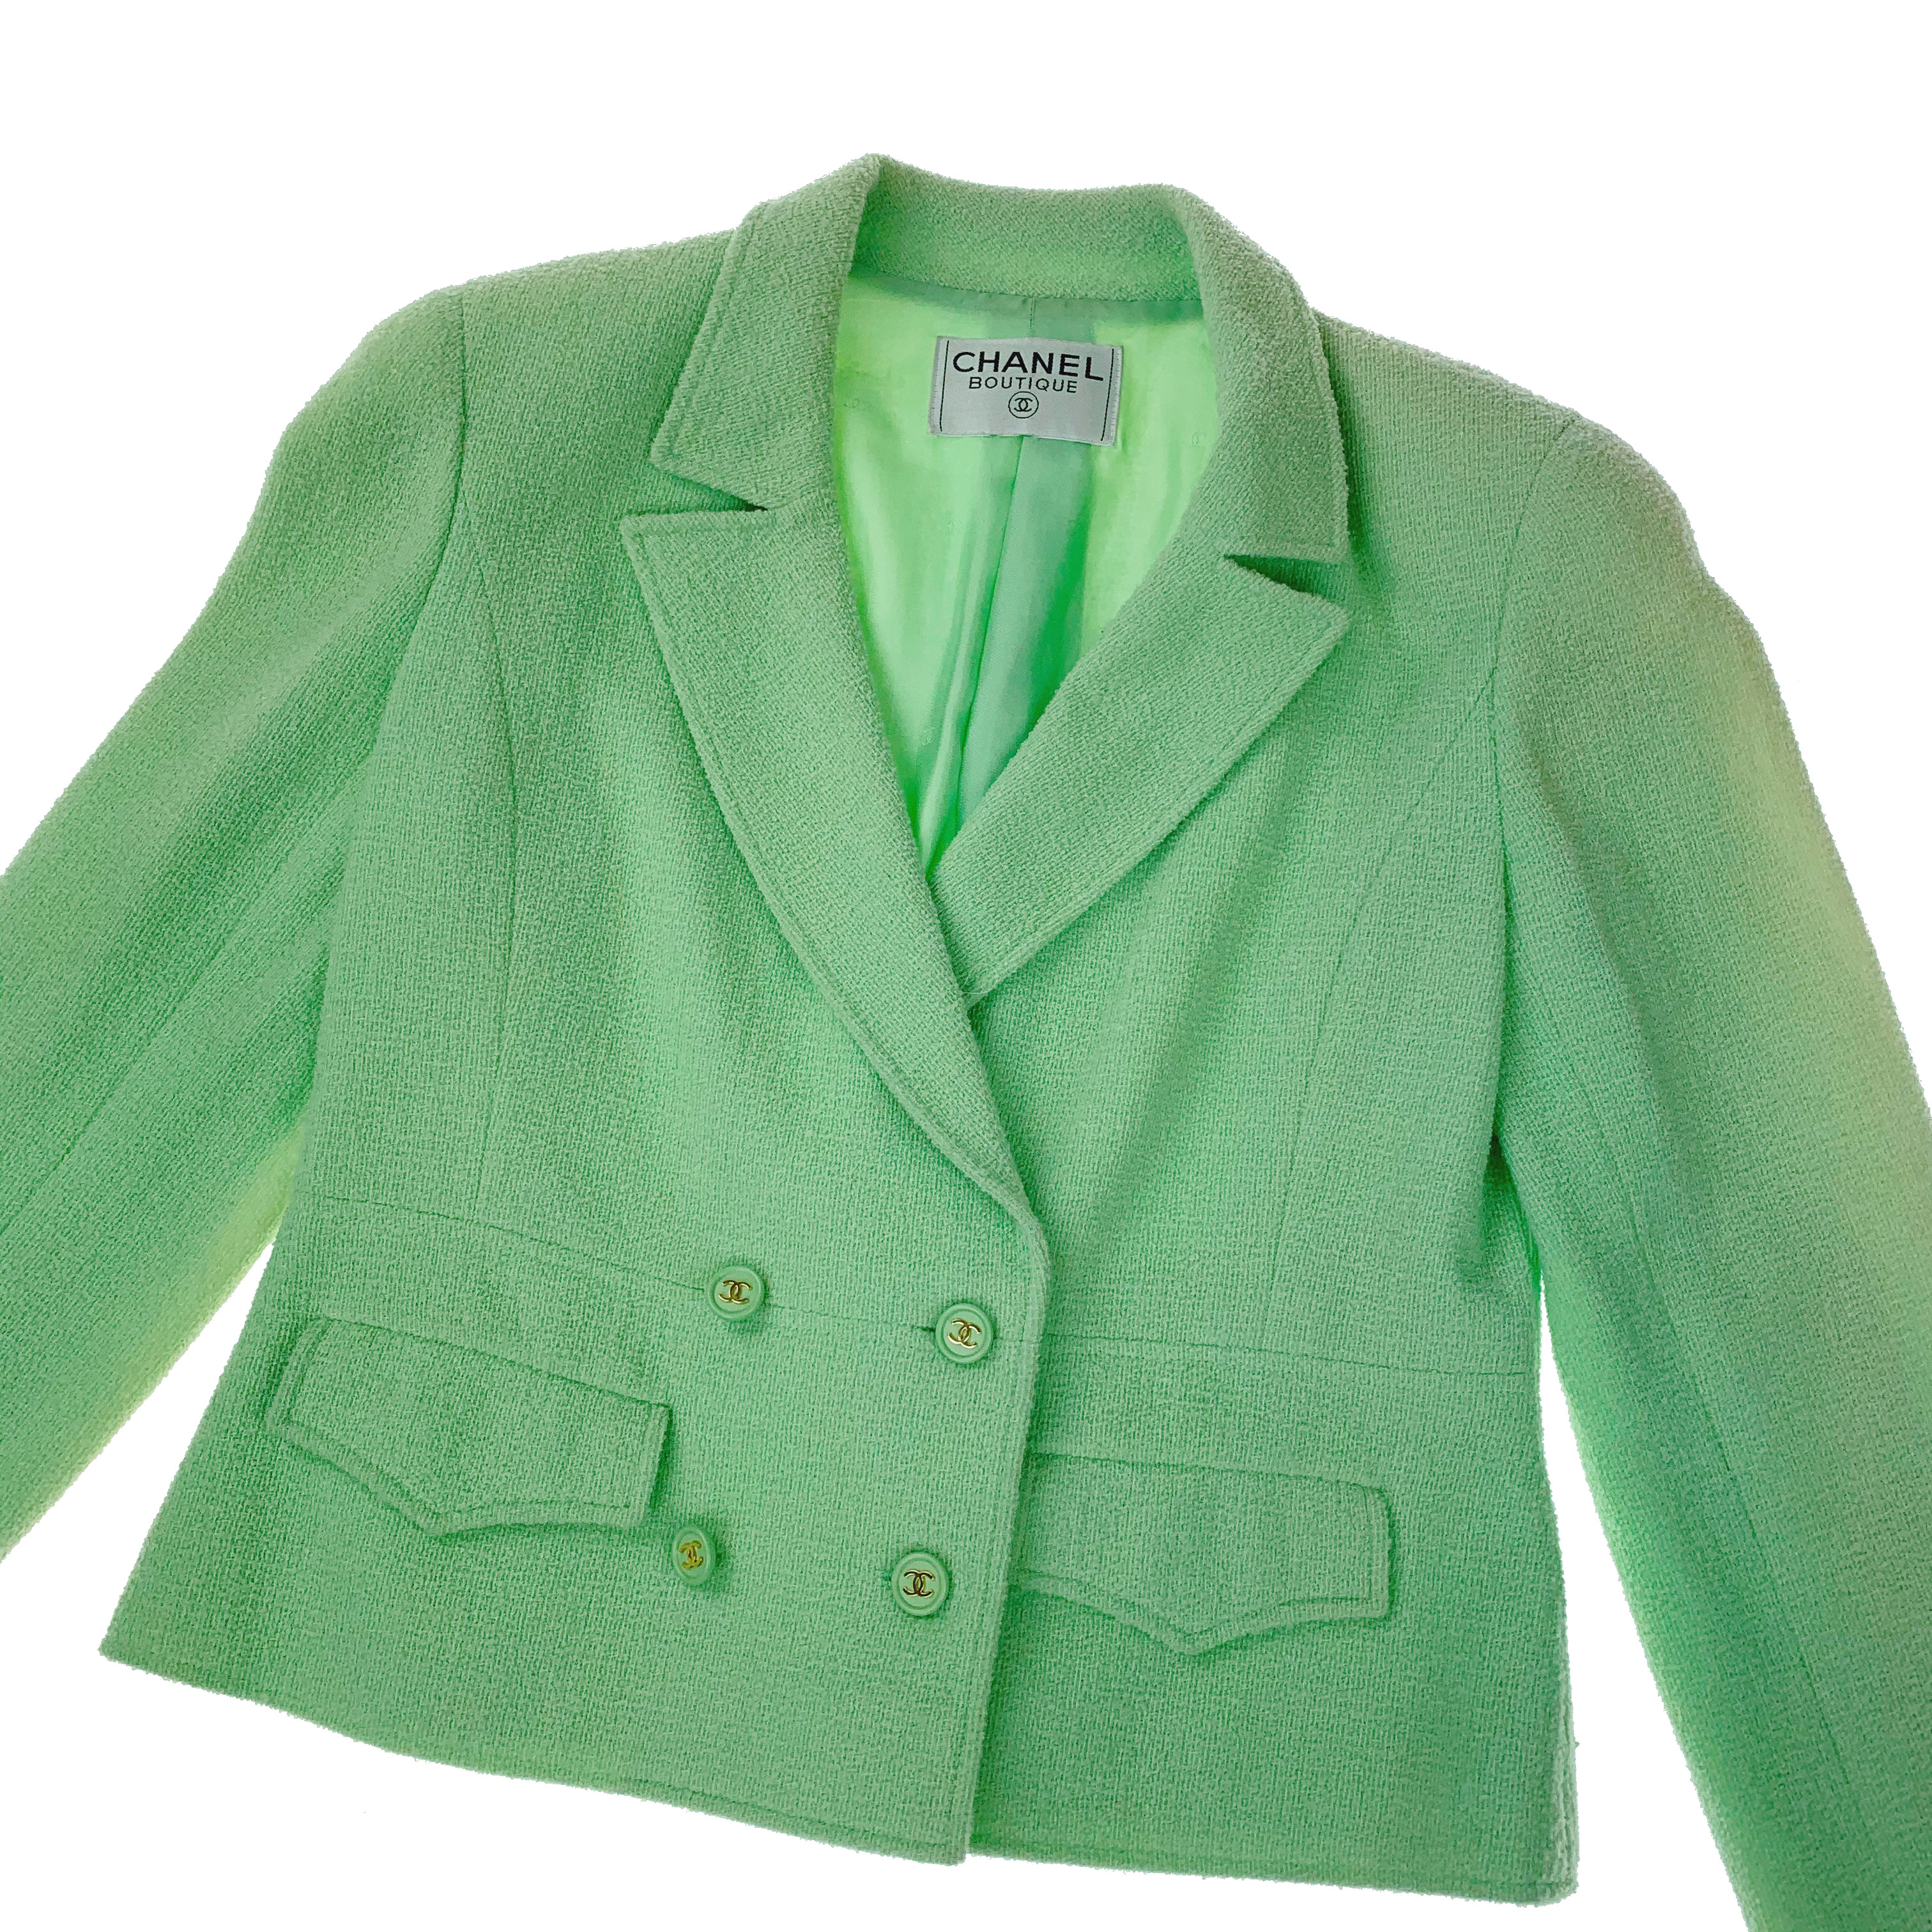 Chanel Lime Green Tweed Jacket Princess Diana - Oliver's Archive